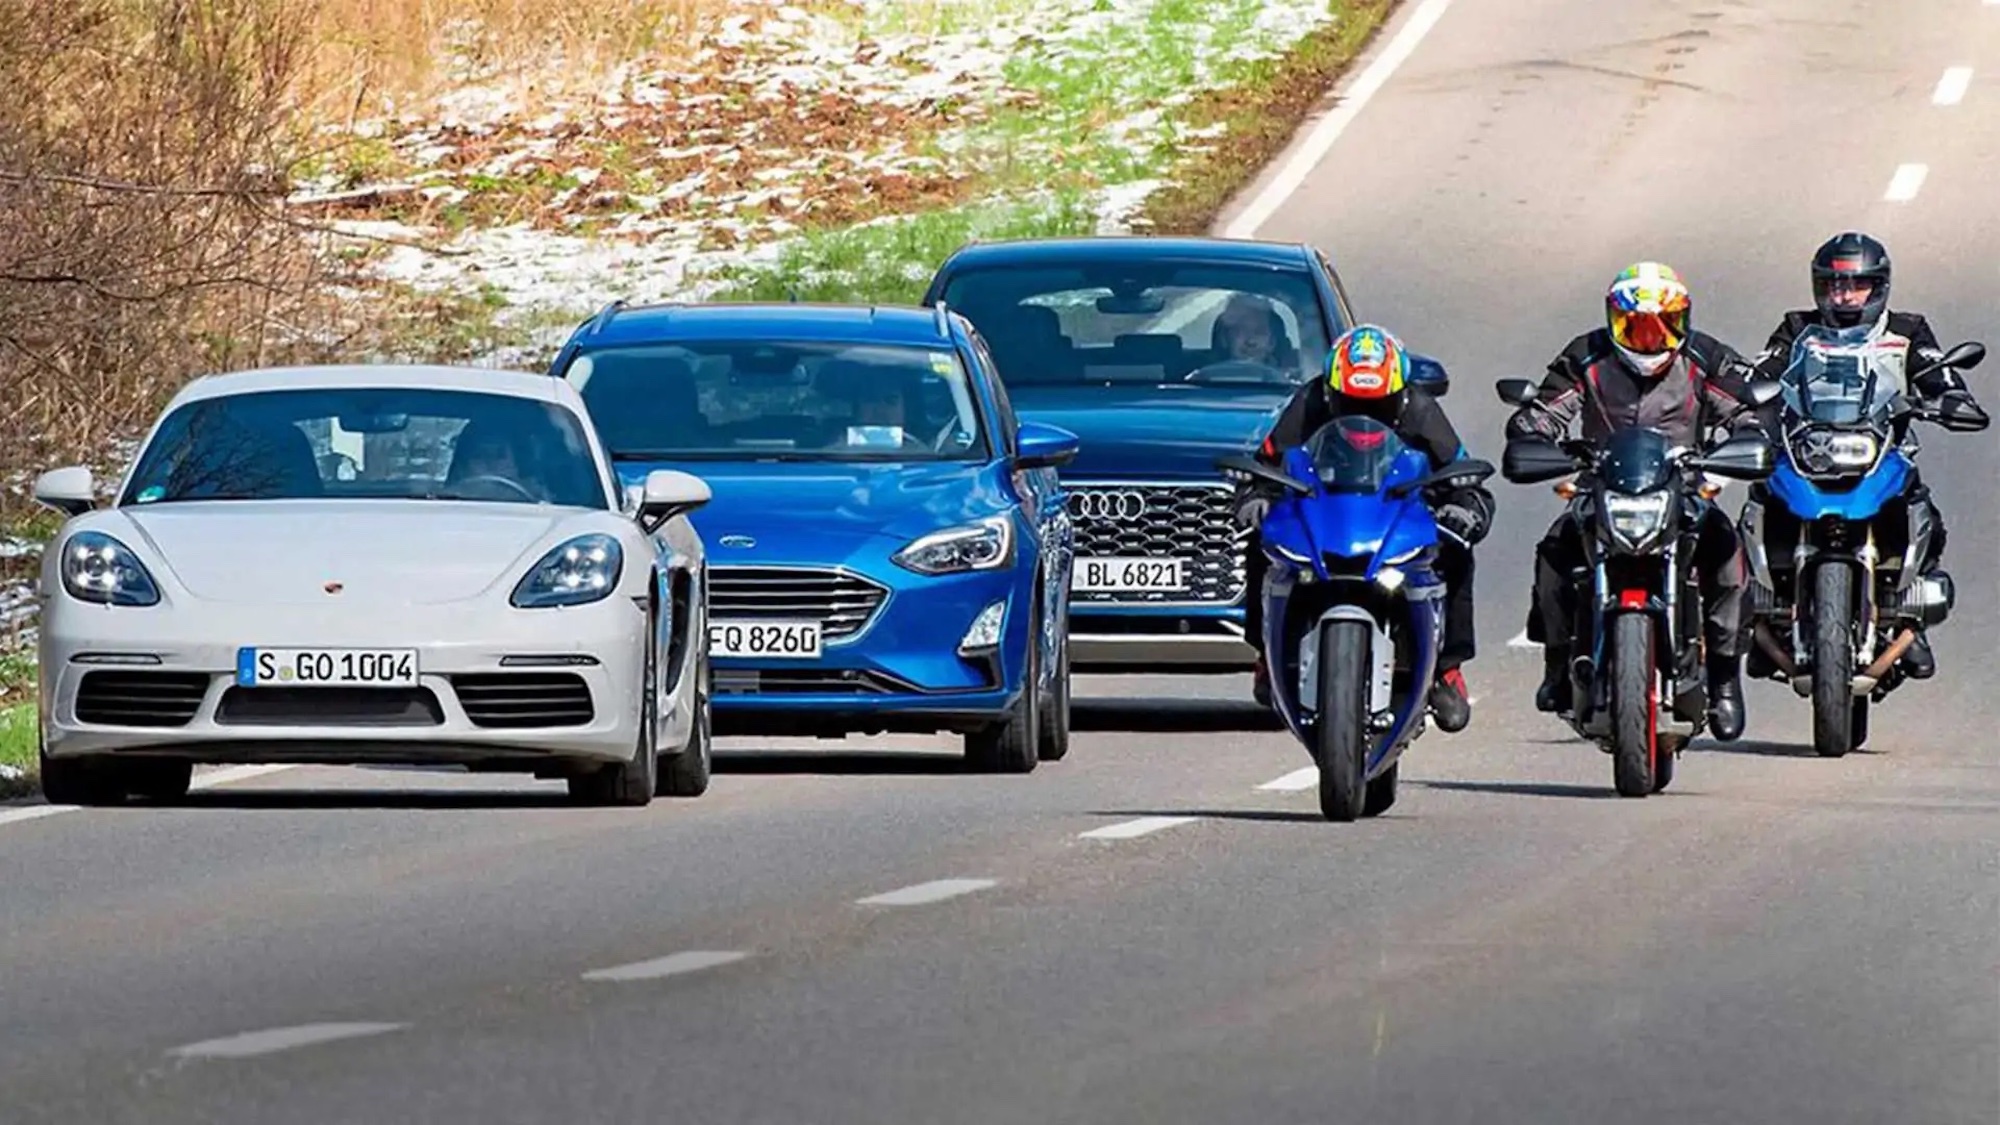 Several cars next to a handful of motorcyclists. Media sourced from RideApart.